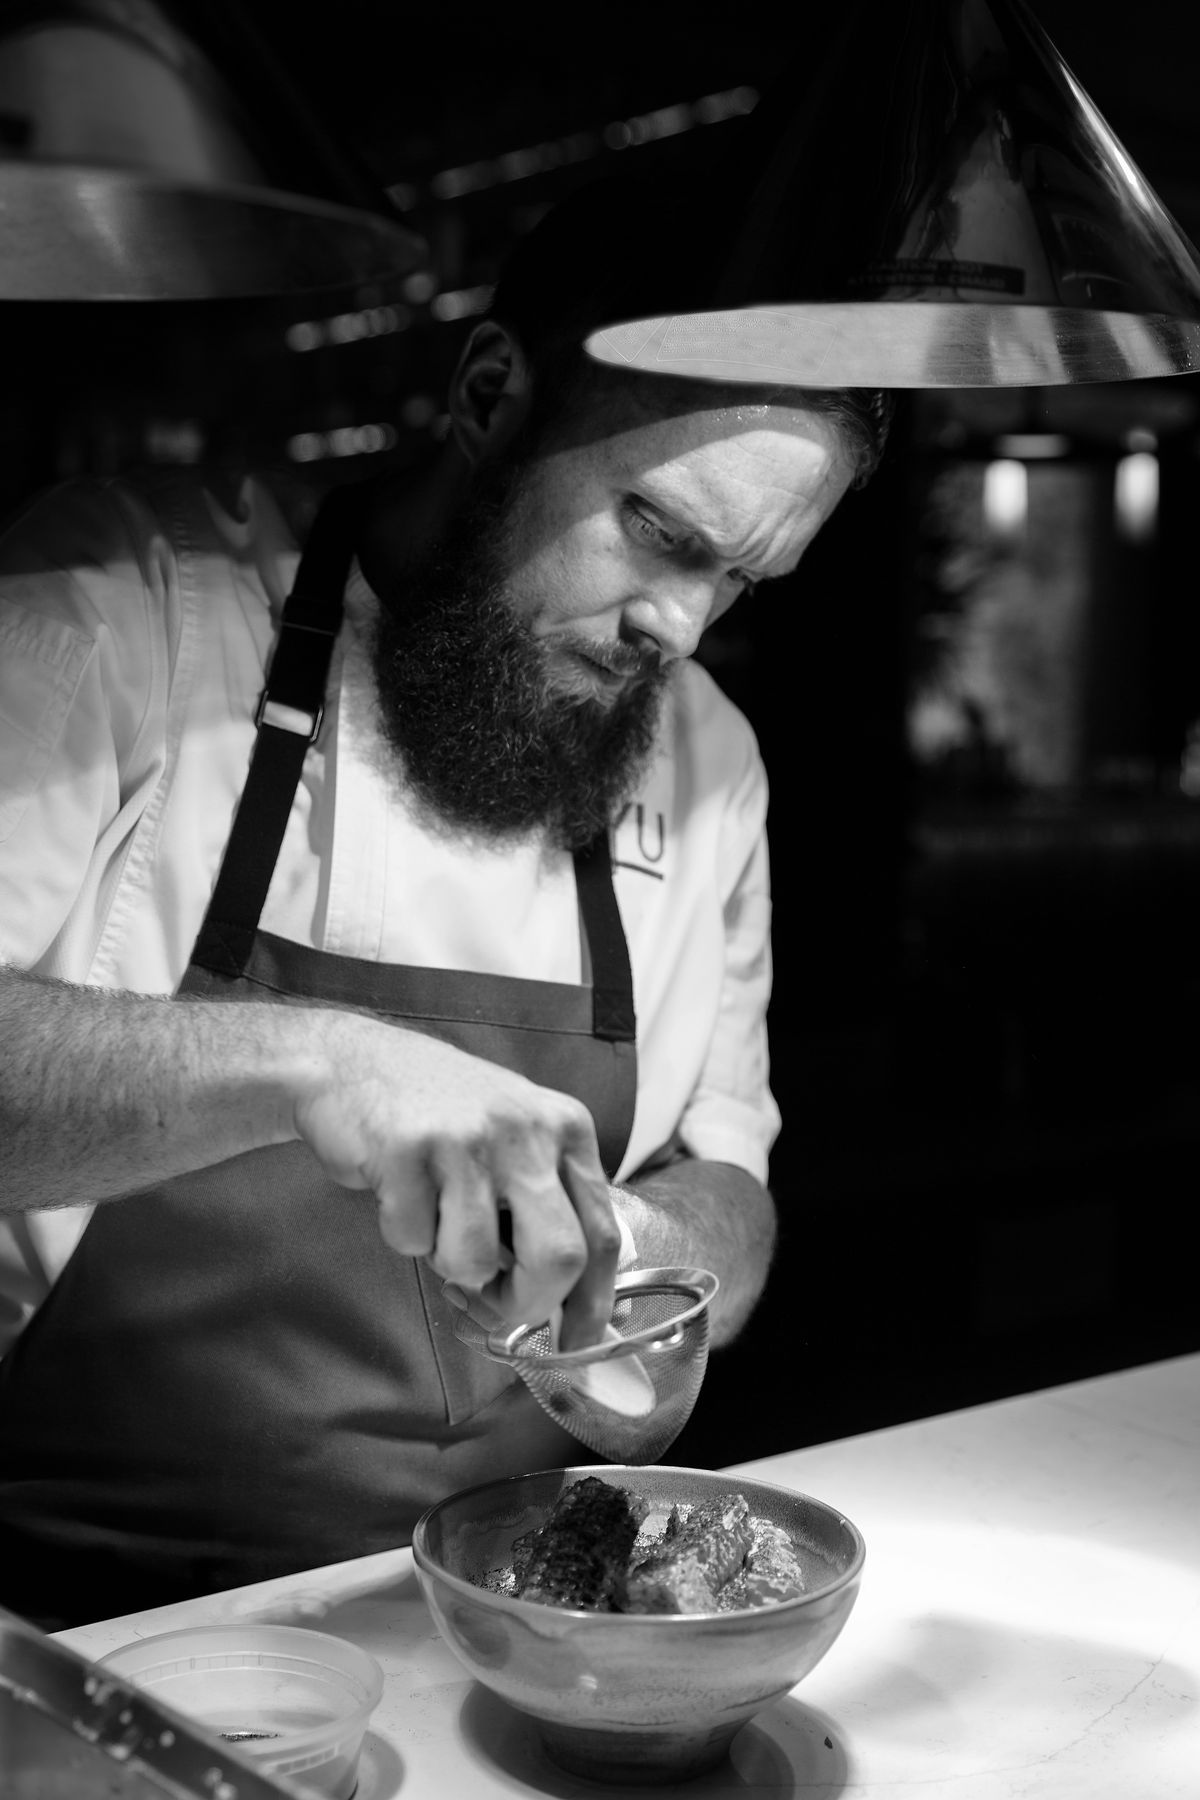 A black and white photo of a chef adding a garnish to a dish.